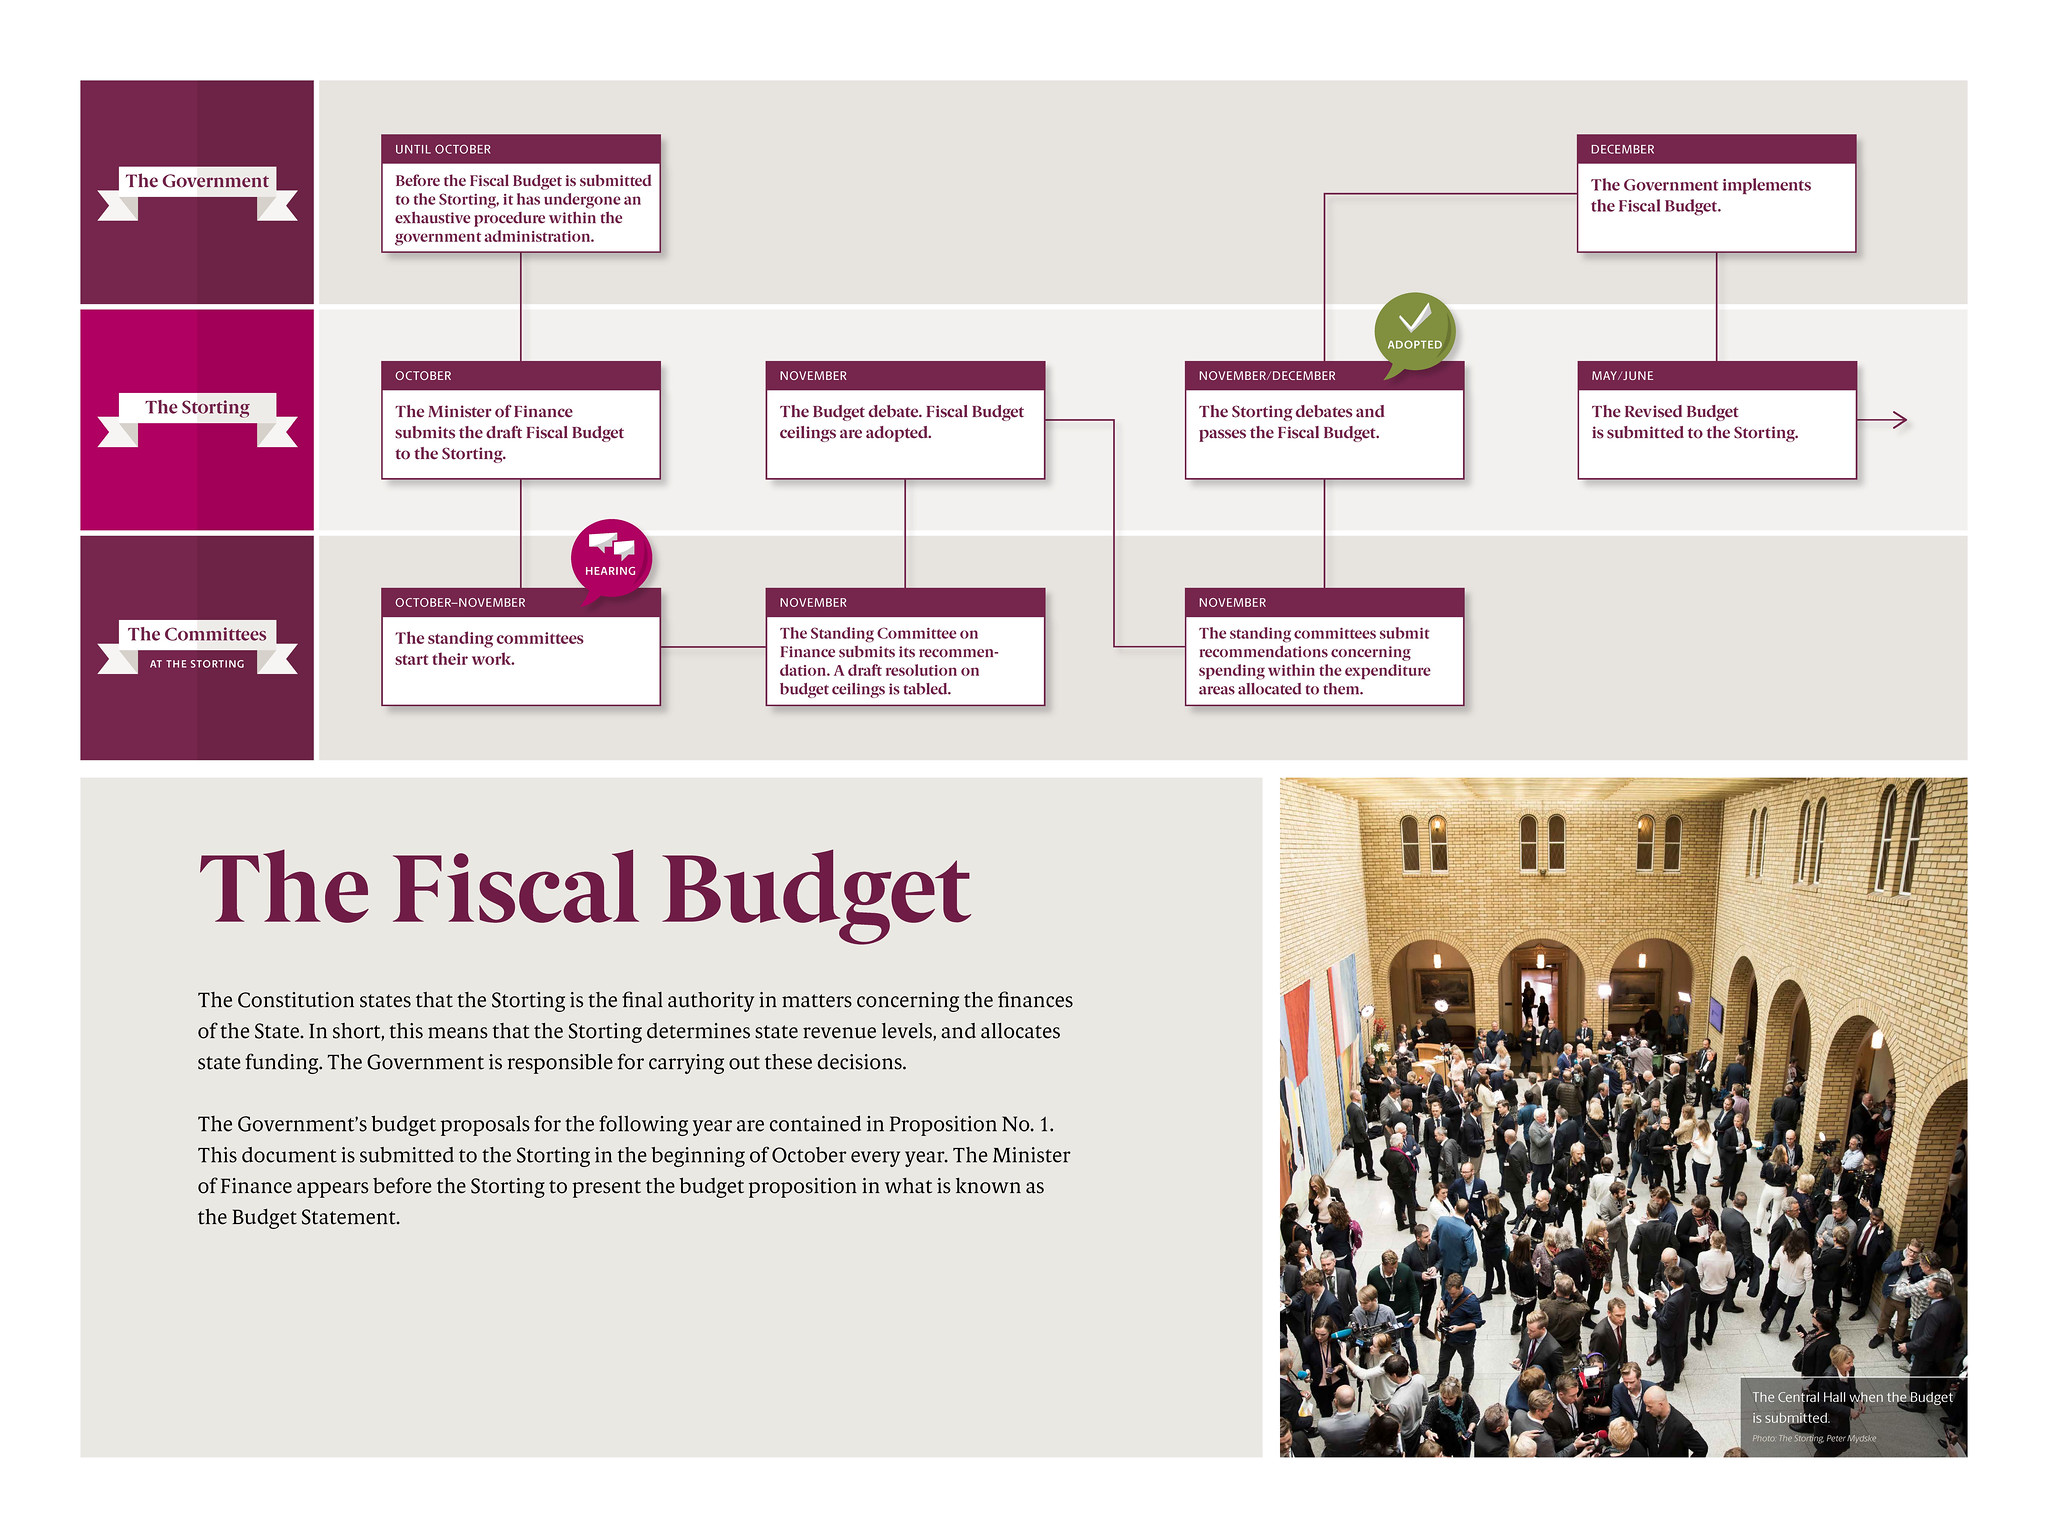 Poster describing the process of the Fiscal Budget